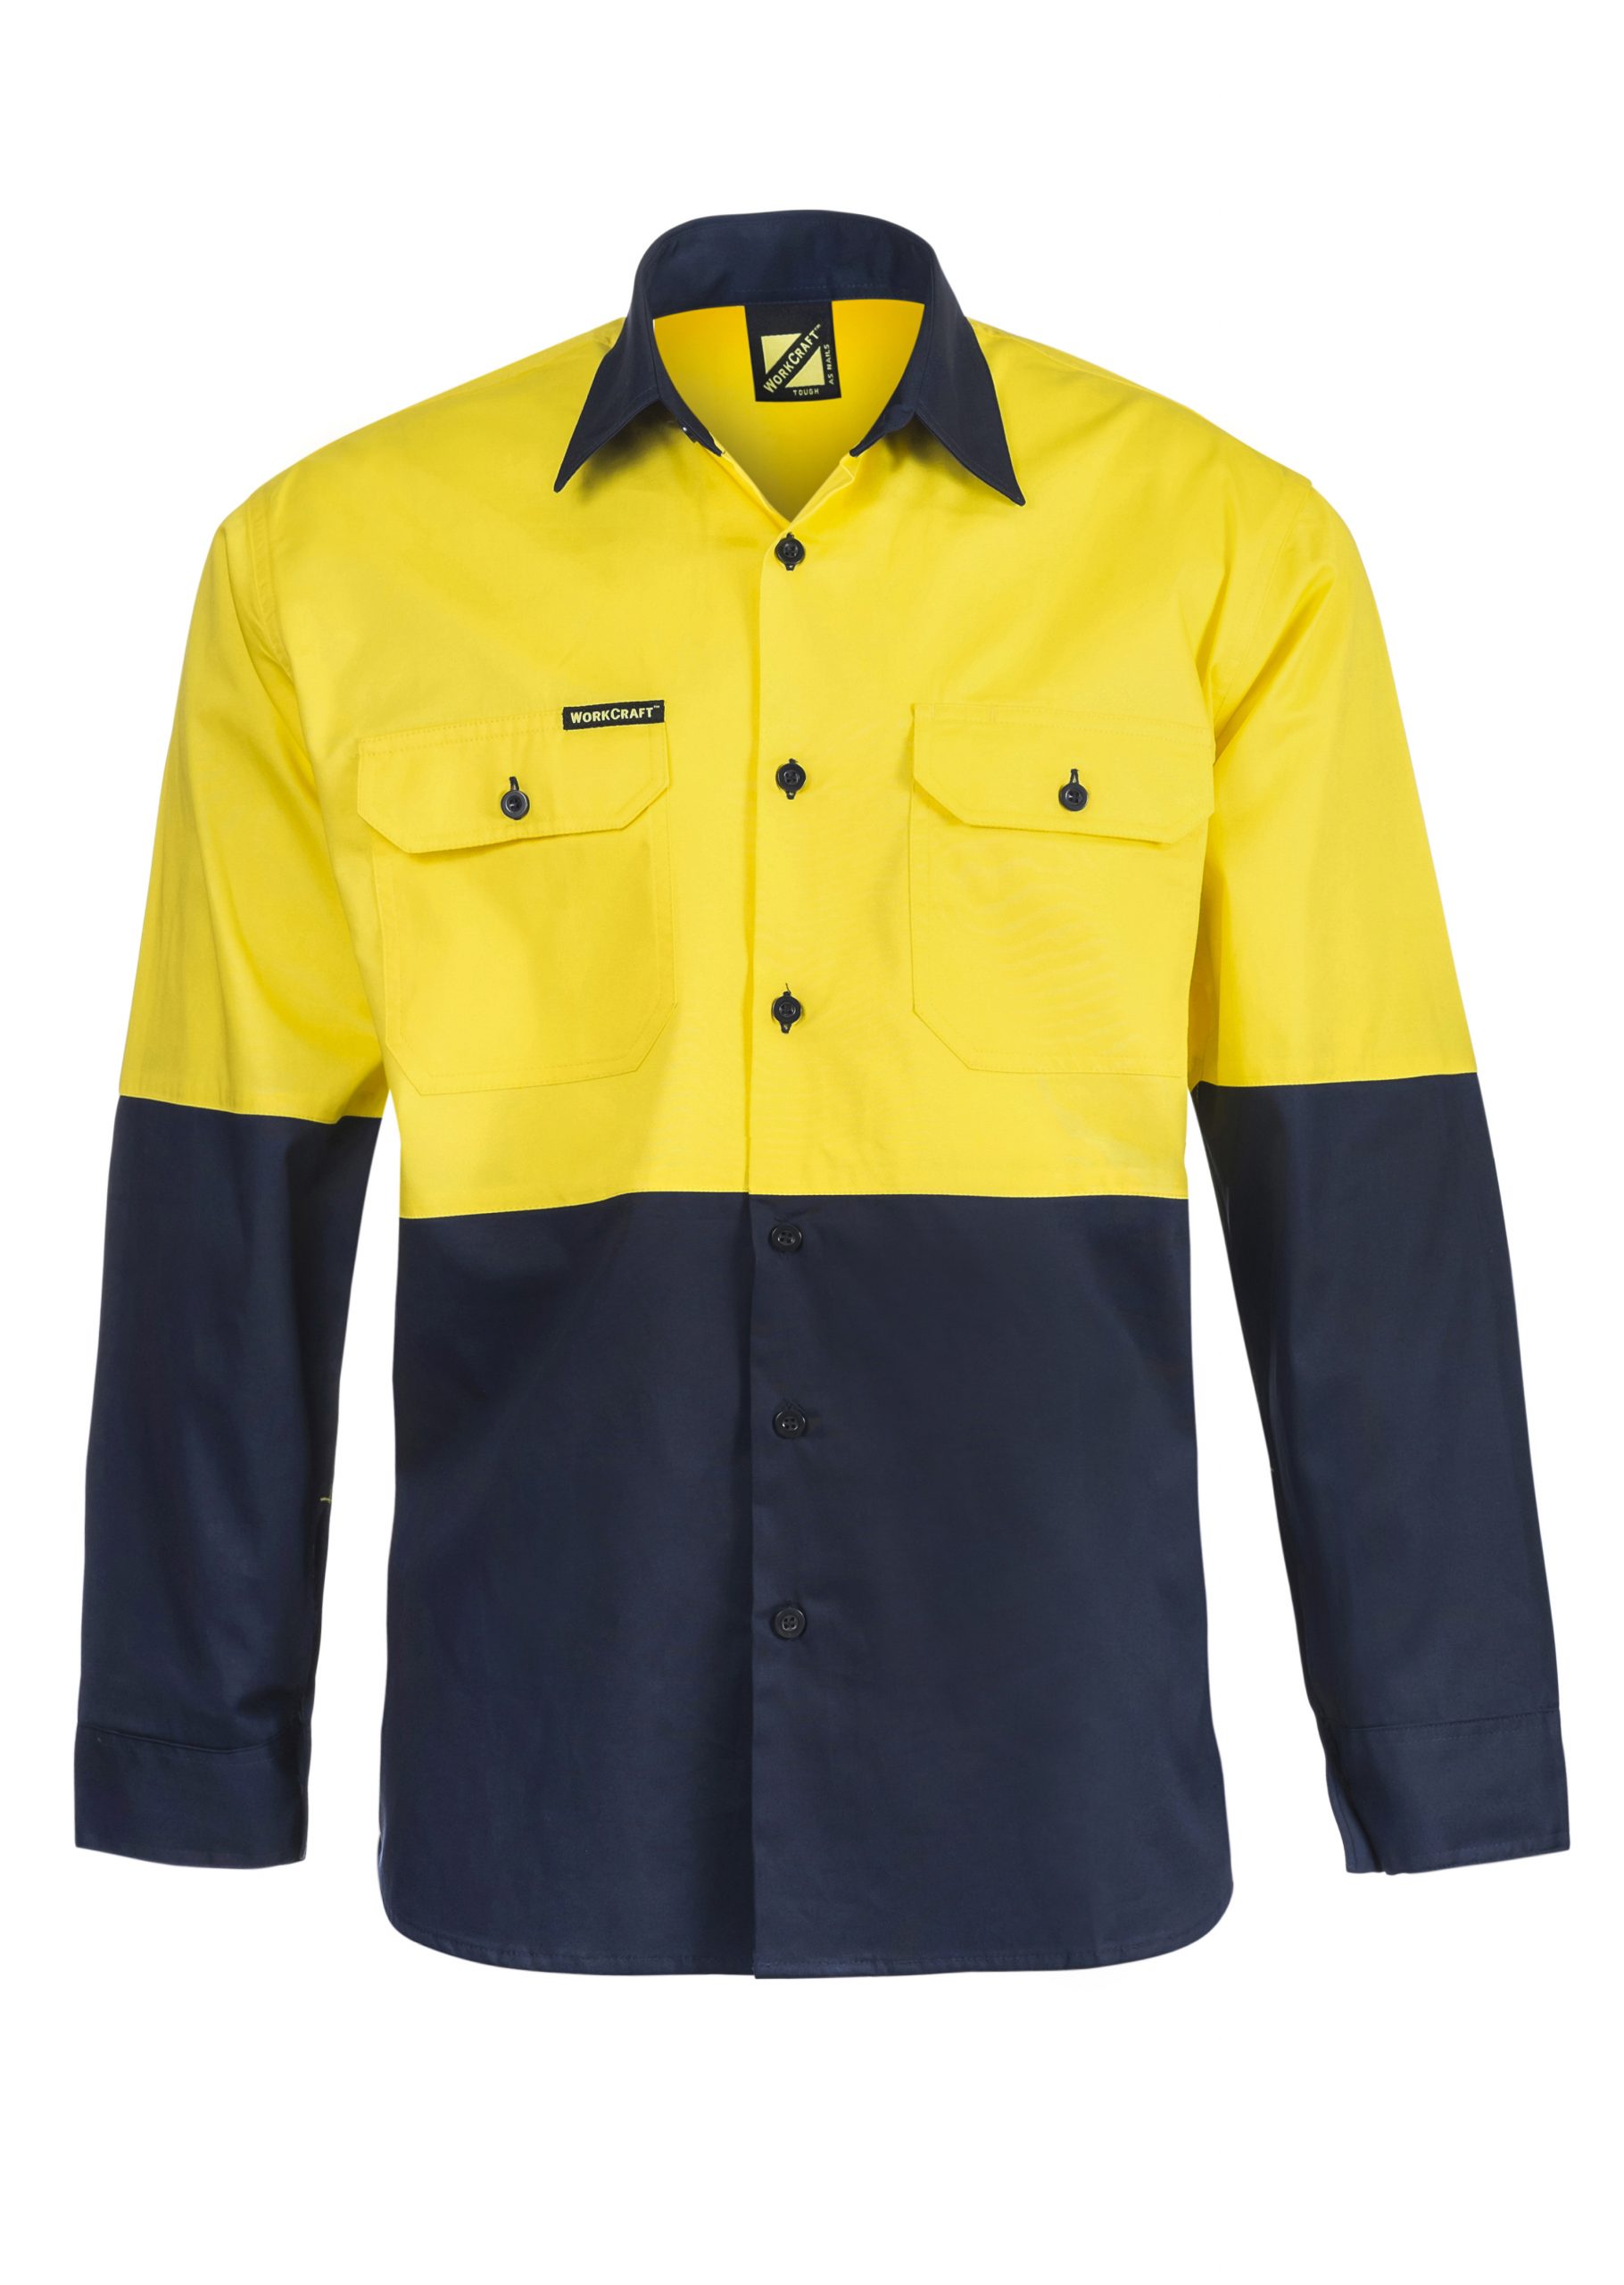 WS4247 Lightweight Hi Vis Two Tone Long Sleeve Vented Cotton Drill Shirt NY1